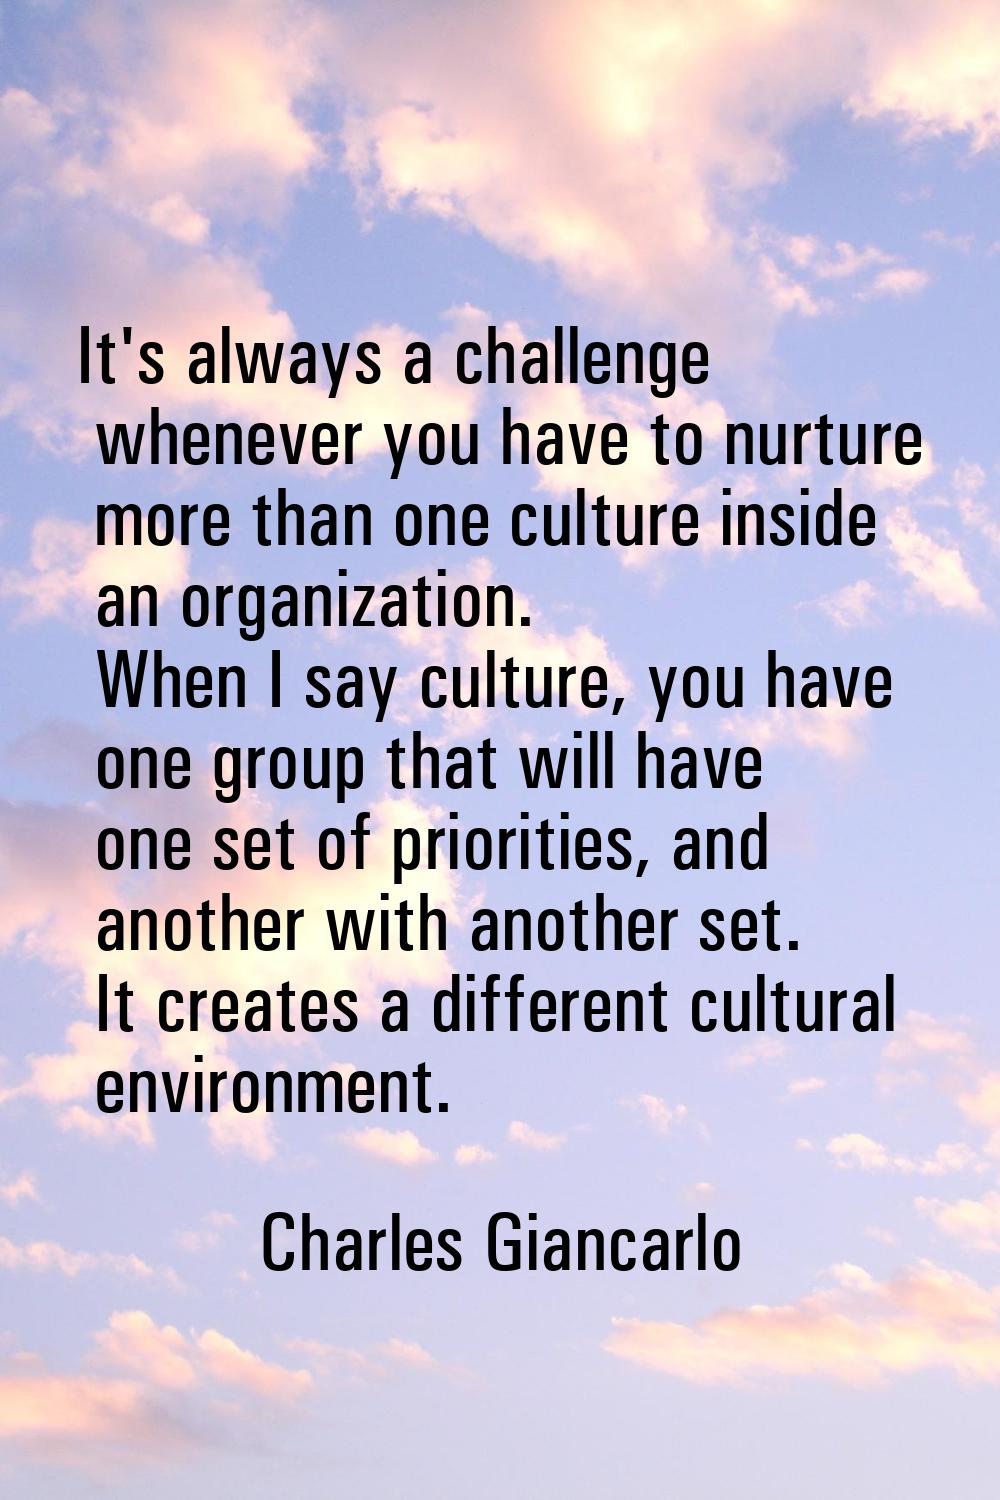 It's always a challenge whenever you have to nurture more than one culture inside an organization. 